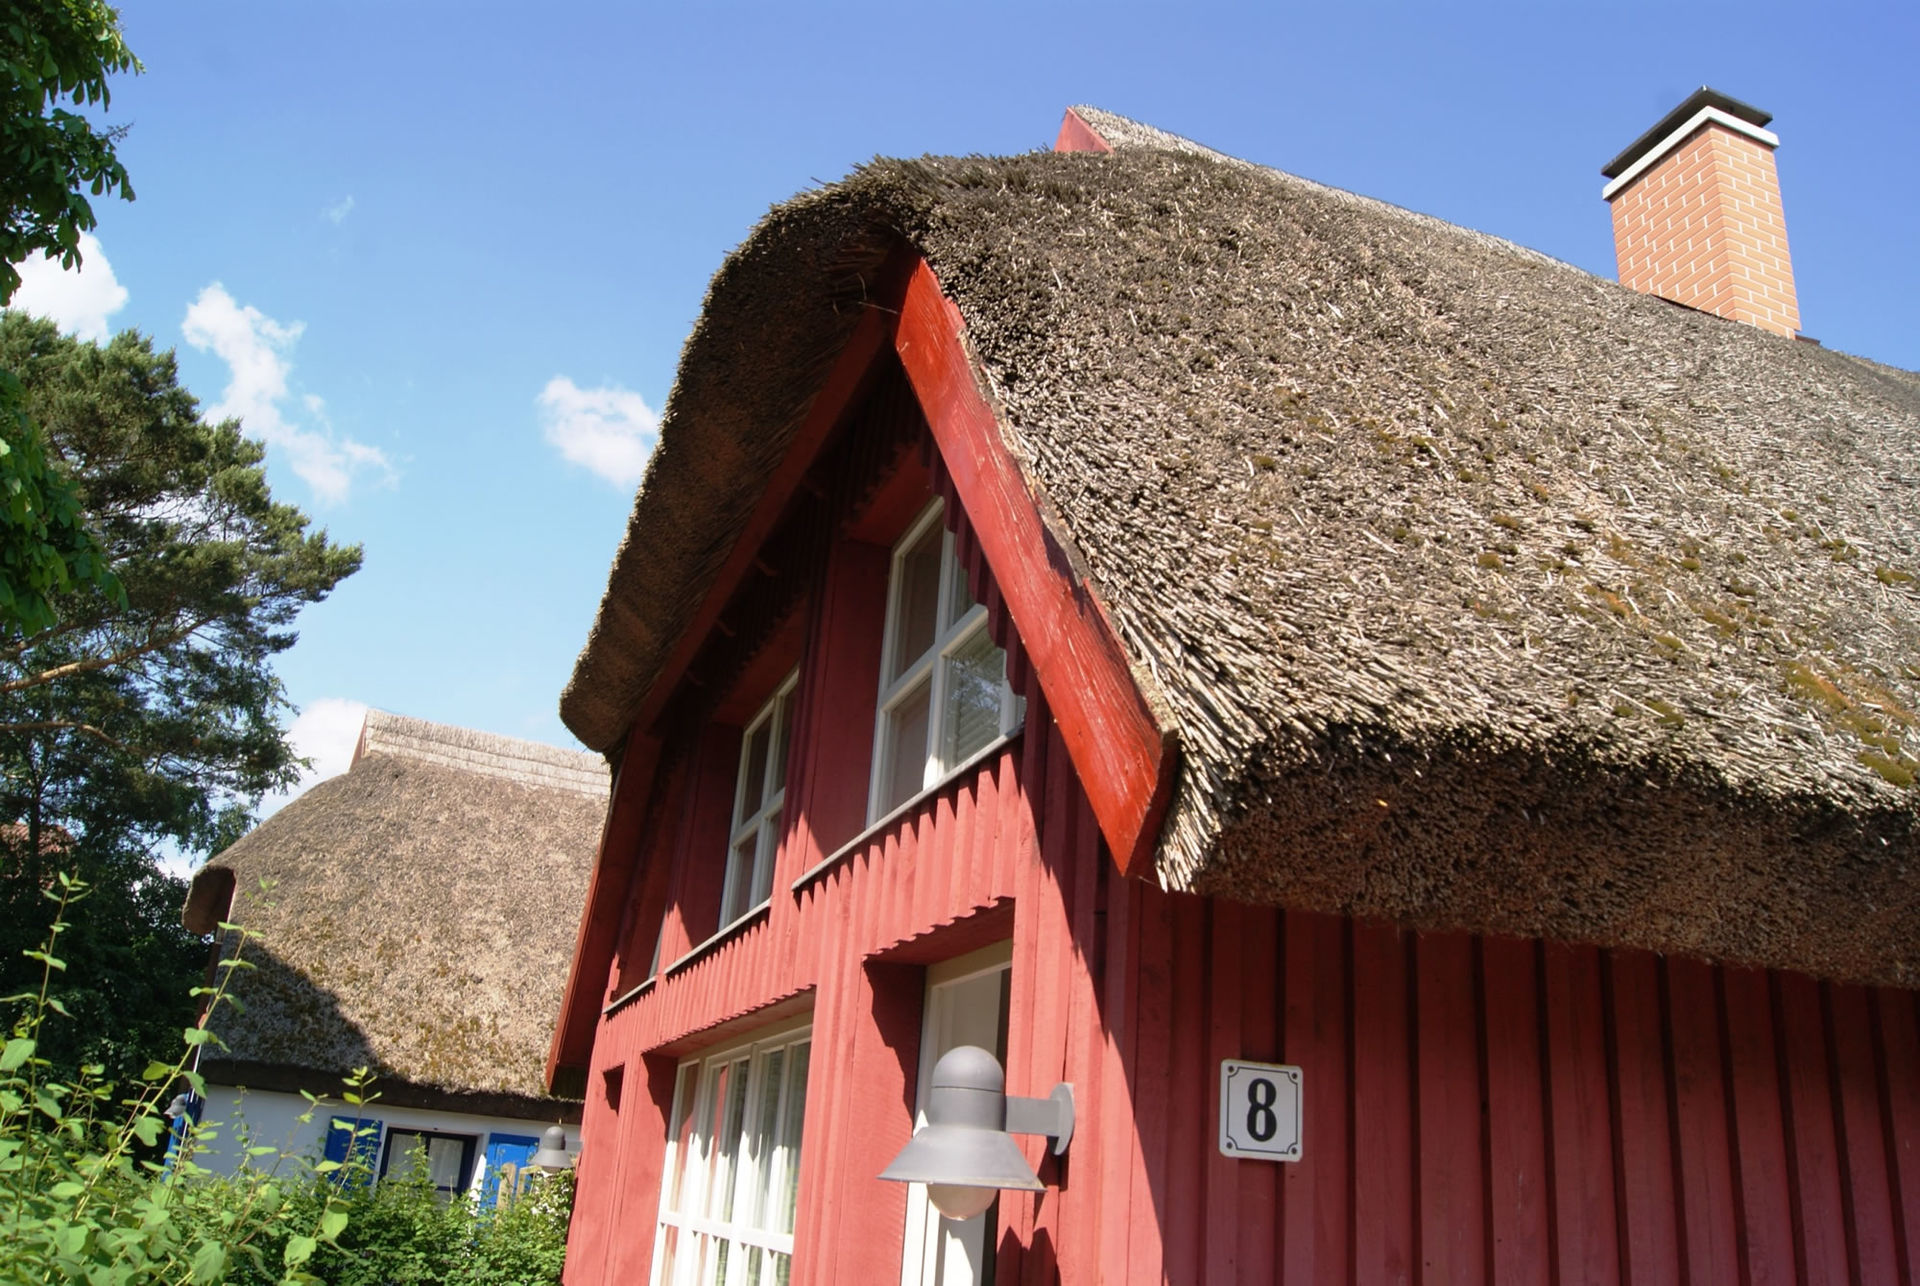 Thatched-roof houses and colorful doors